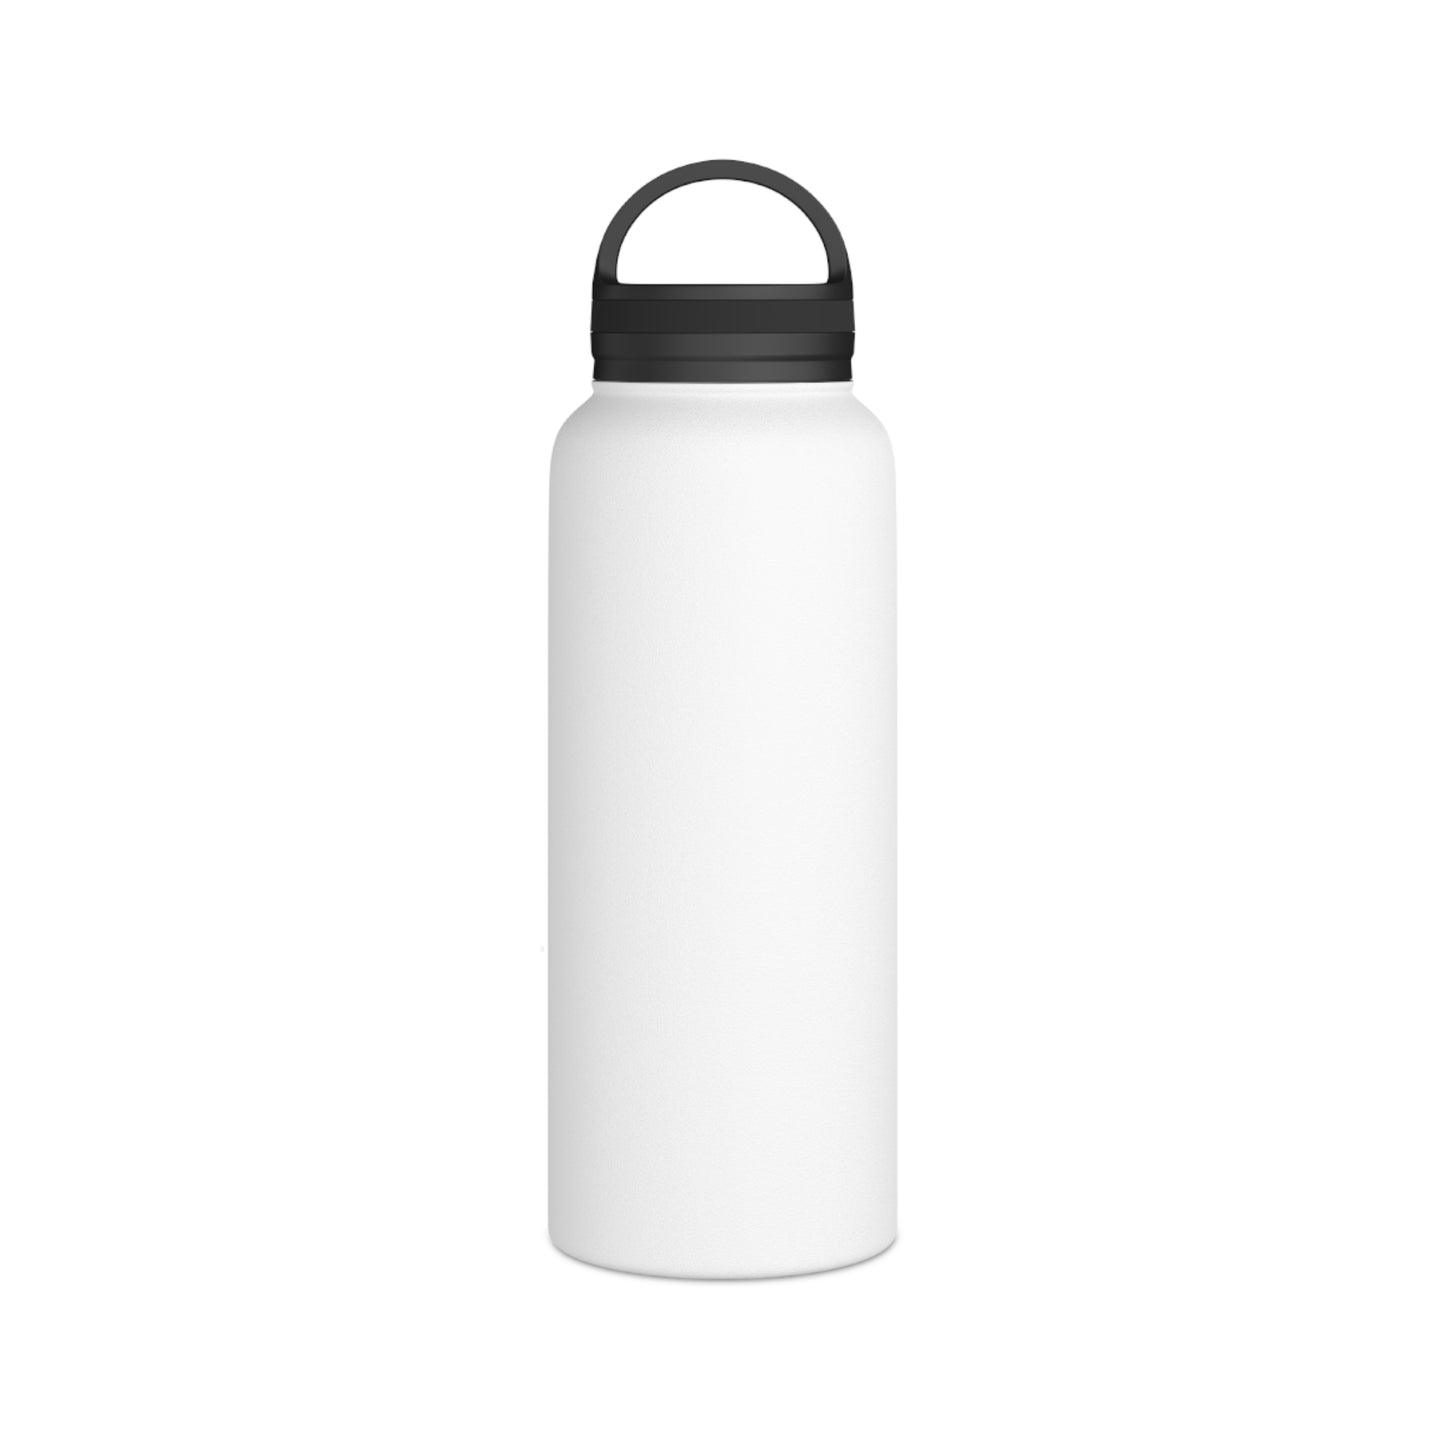 Meicher - White Stainless Steel Water Bottle, Handle Lid